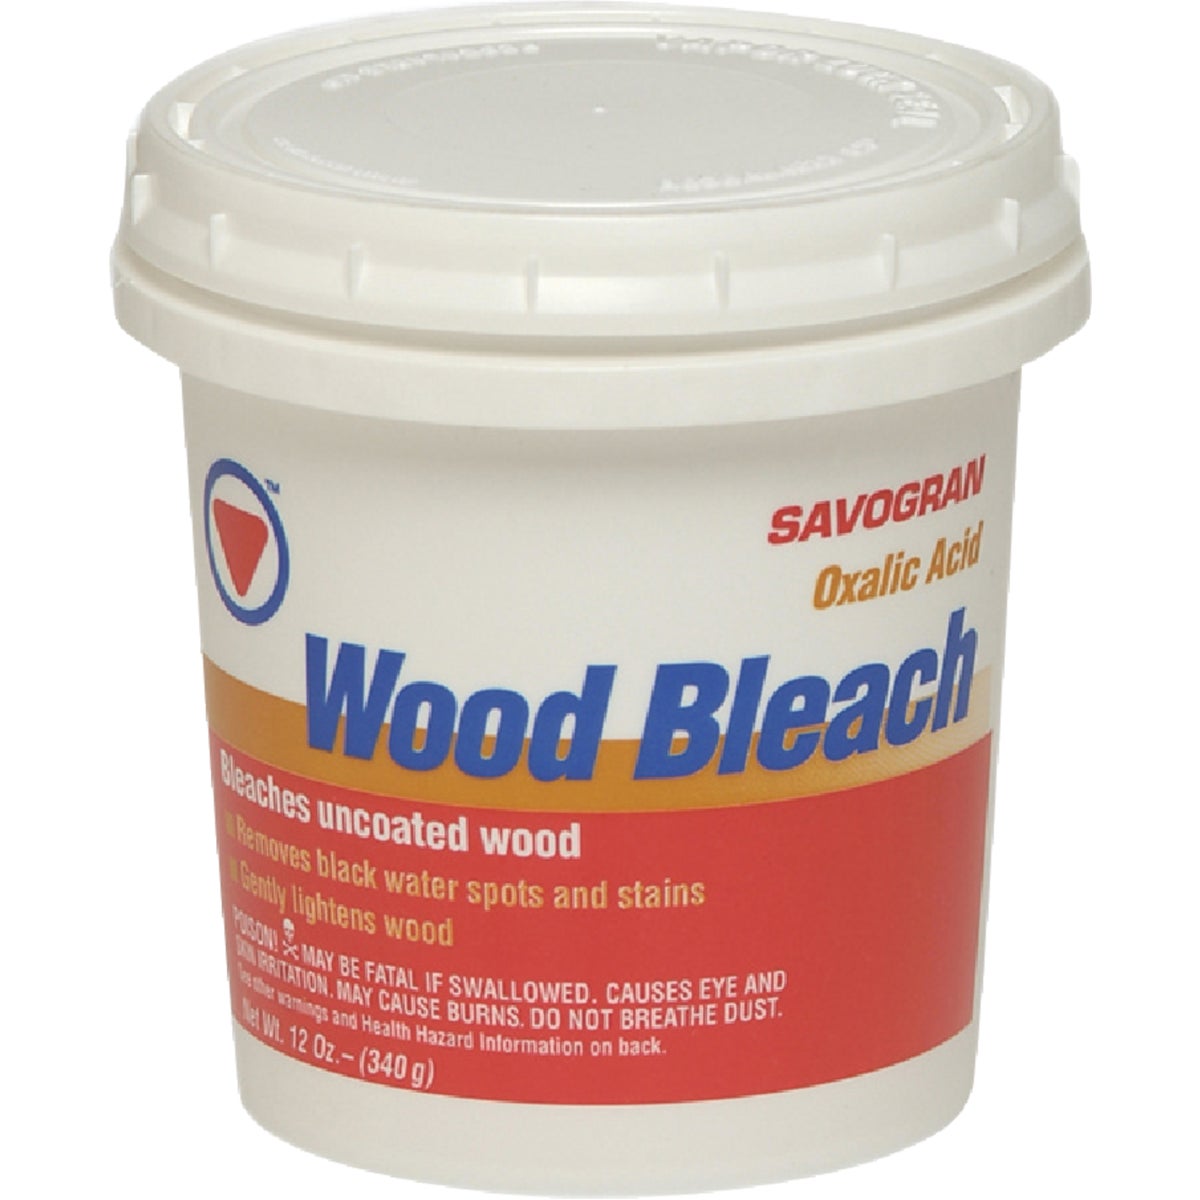 Item 775495, Wood bleach contains oxalic acid which, when mixed with 1 gallon of hot 